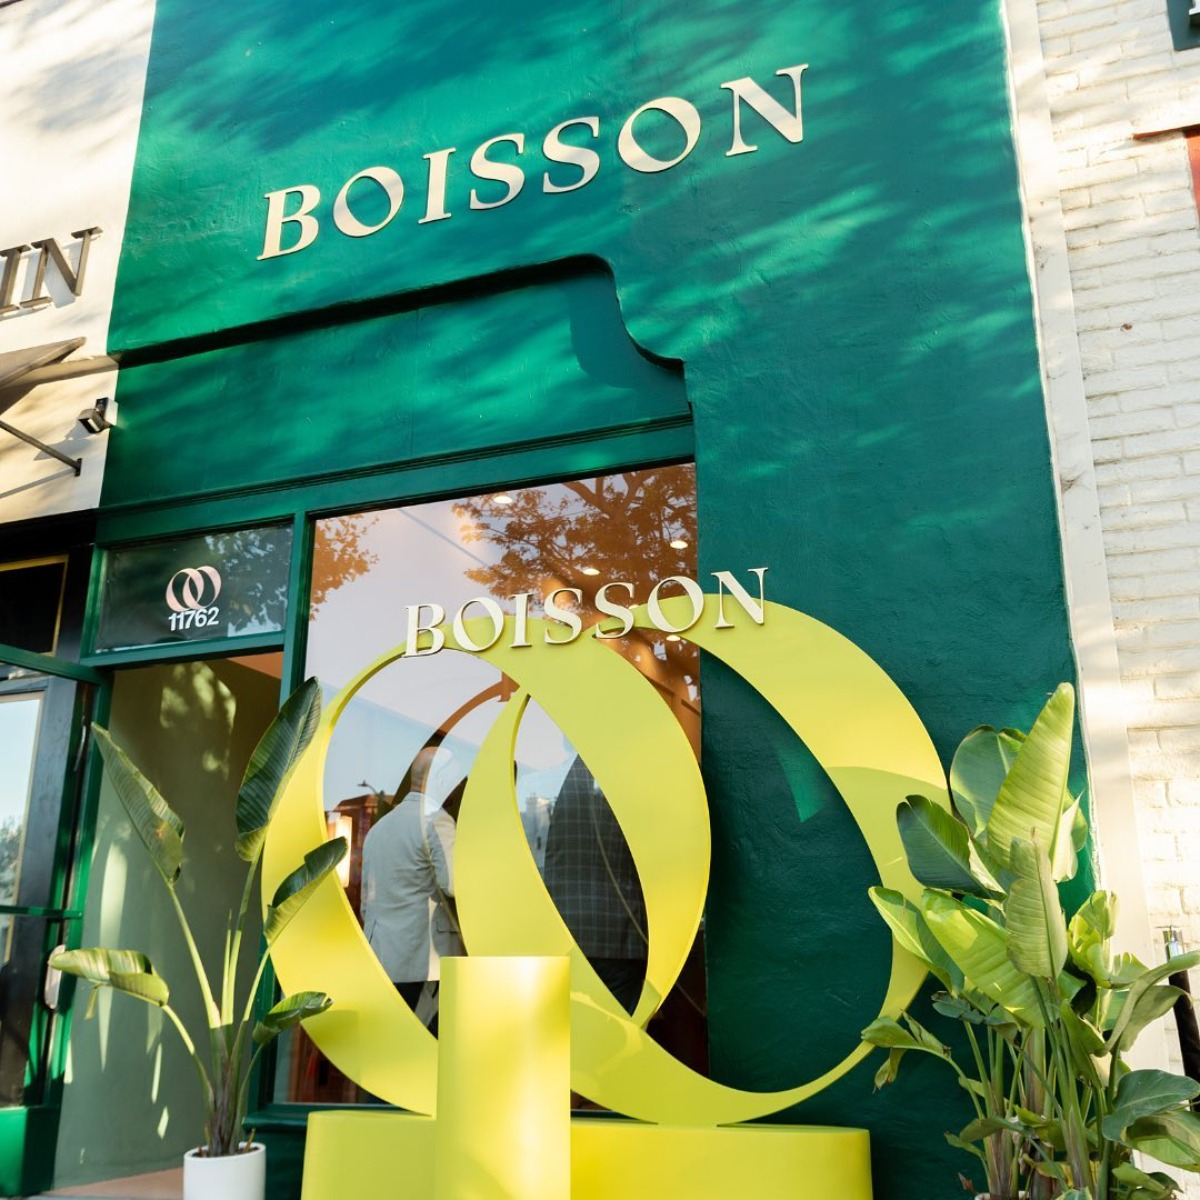 Boisson Making West Coast Debut with Three New Sites